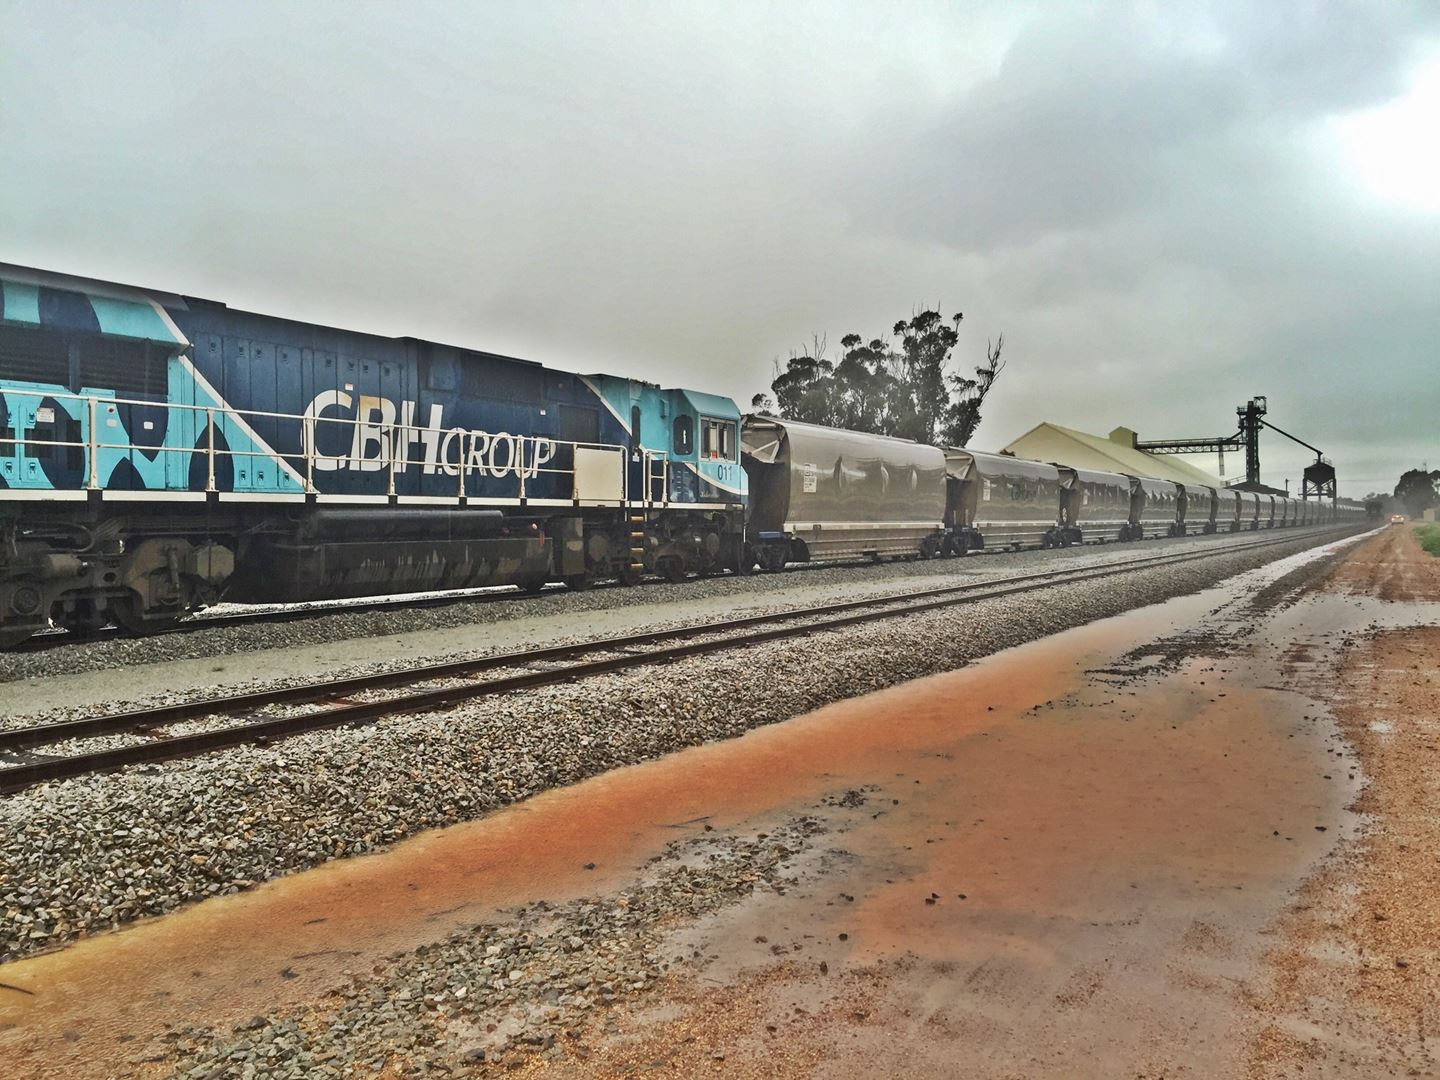 CBH train pulling in to Arrino site for grain